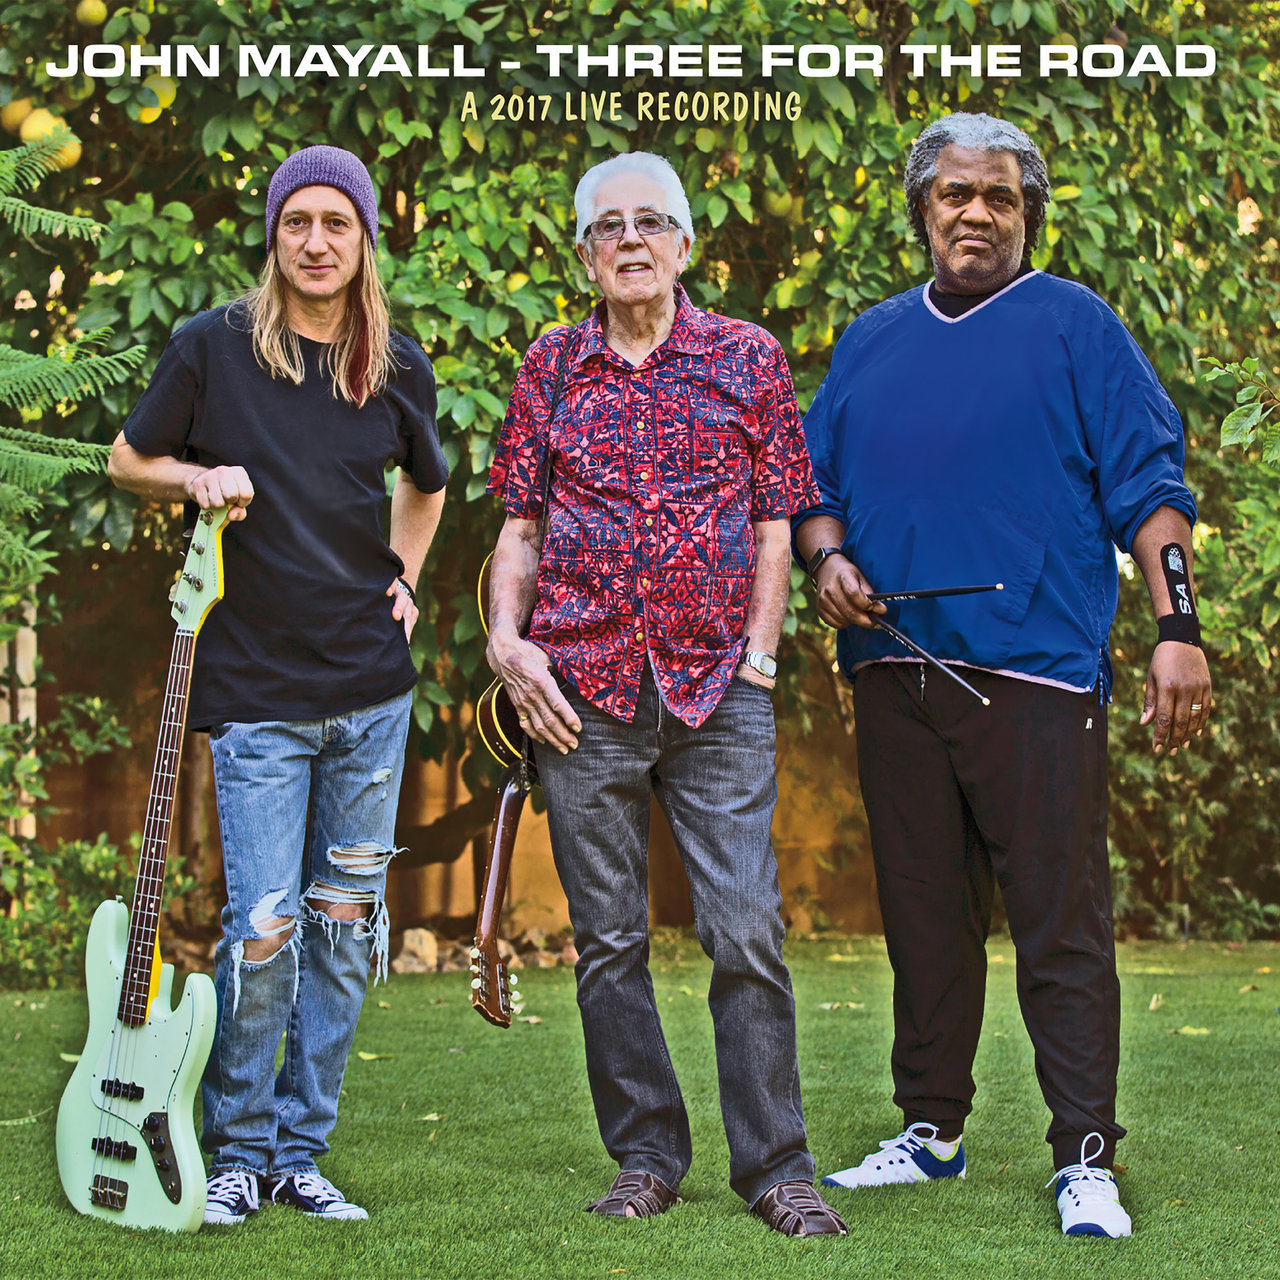 Three for the Road (A 2017 Live Recording) [2018]